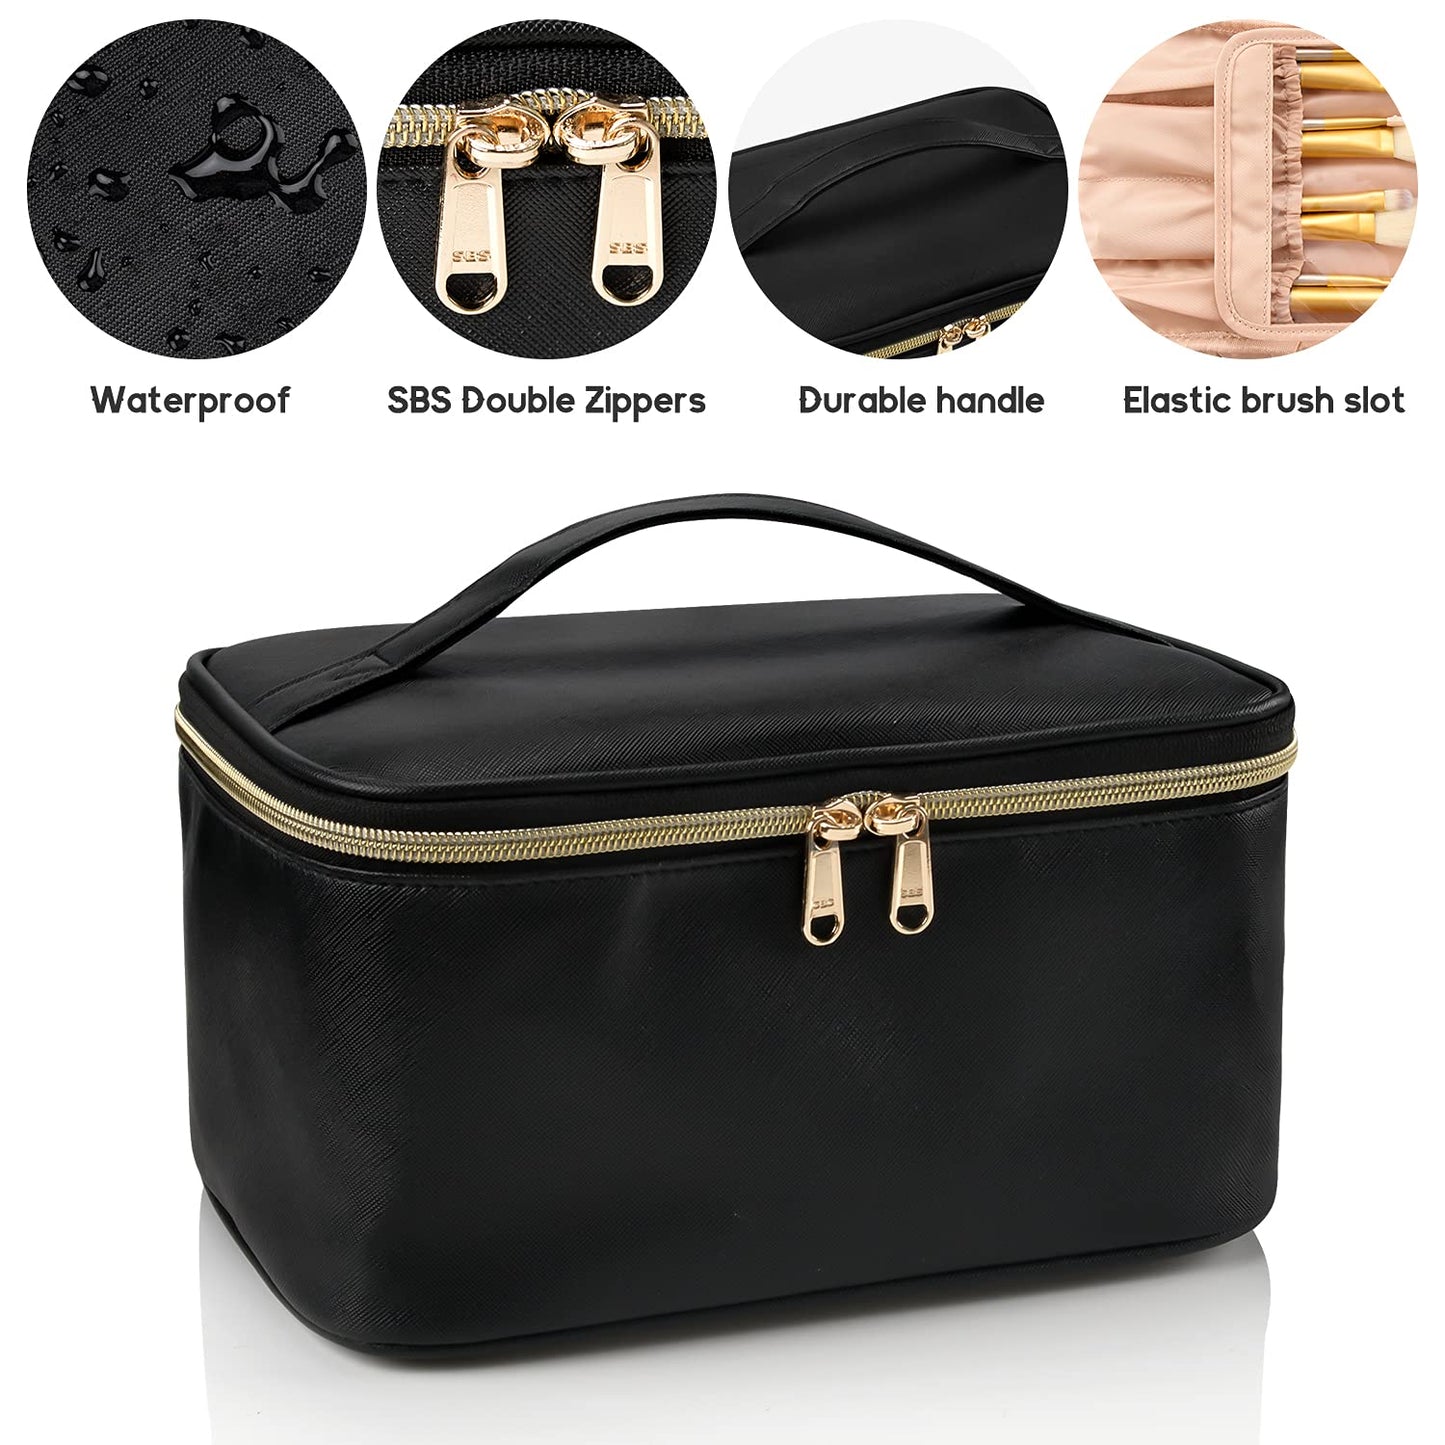 OCHEAL Makeup Bag, Portable Cosmetic Bag, Large Capacity Travel Makeup Case Organizer, Black Makeup Bags For Women Toiletry Bag for Girls Traveling With Handle and Divider